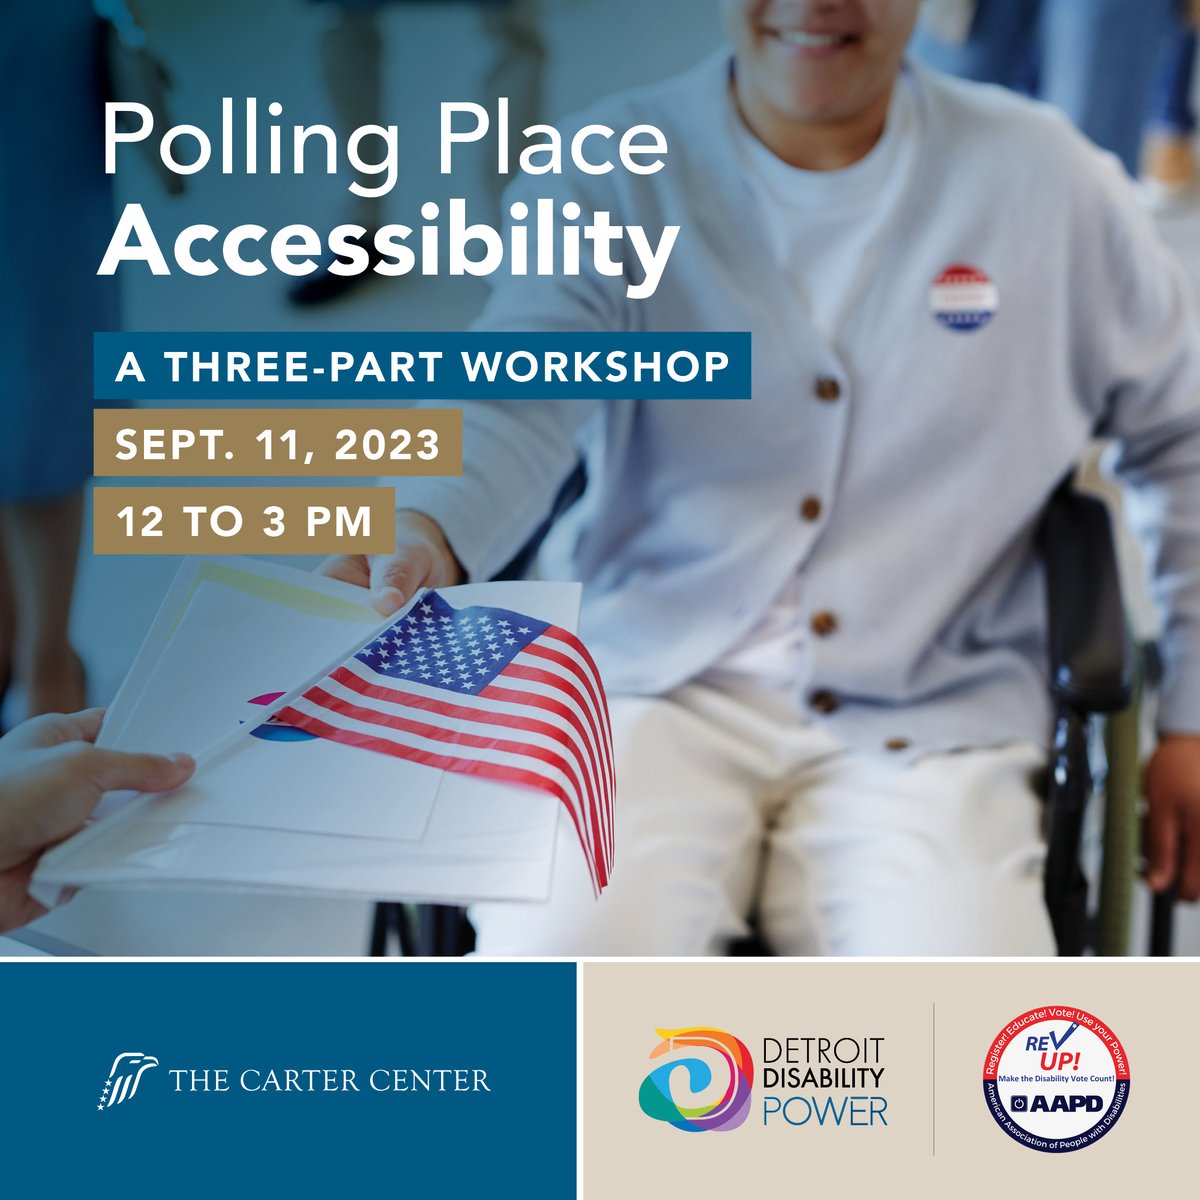 Join disability advocates and election officials for an online workshop on Sept. 11 on how to make polling places accessible to all voters. American Sign Language interpretation and live captioning will be provided. Register here: bit.ly/47SV5rW @DisabilityPower @AAPD